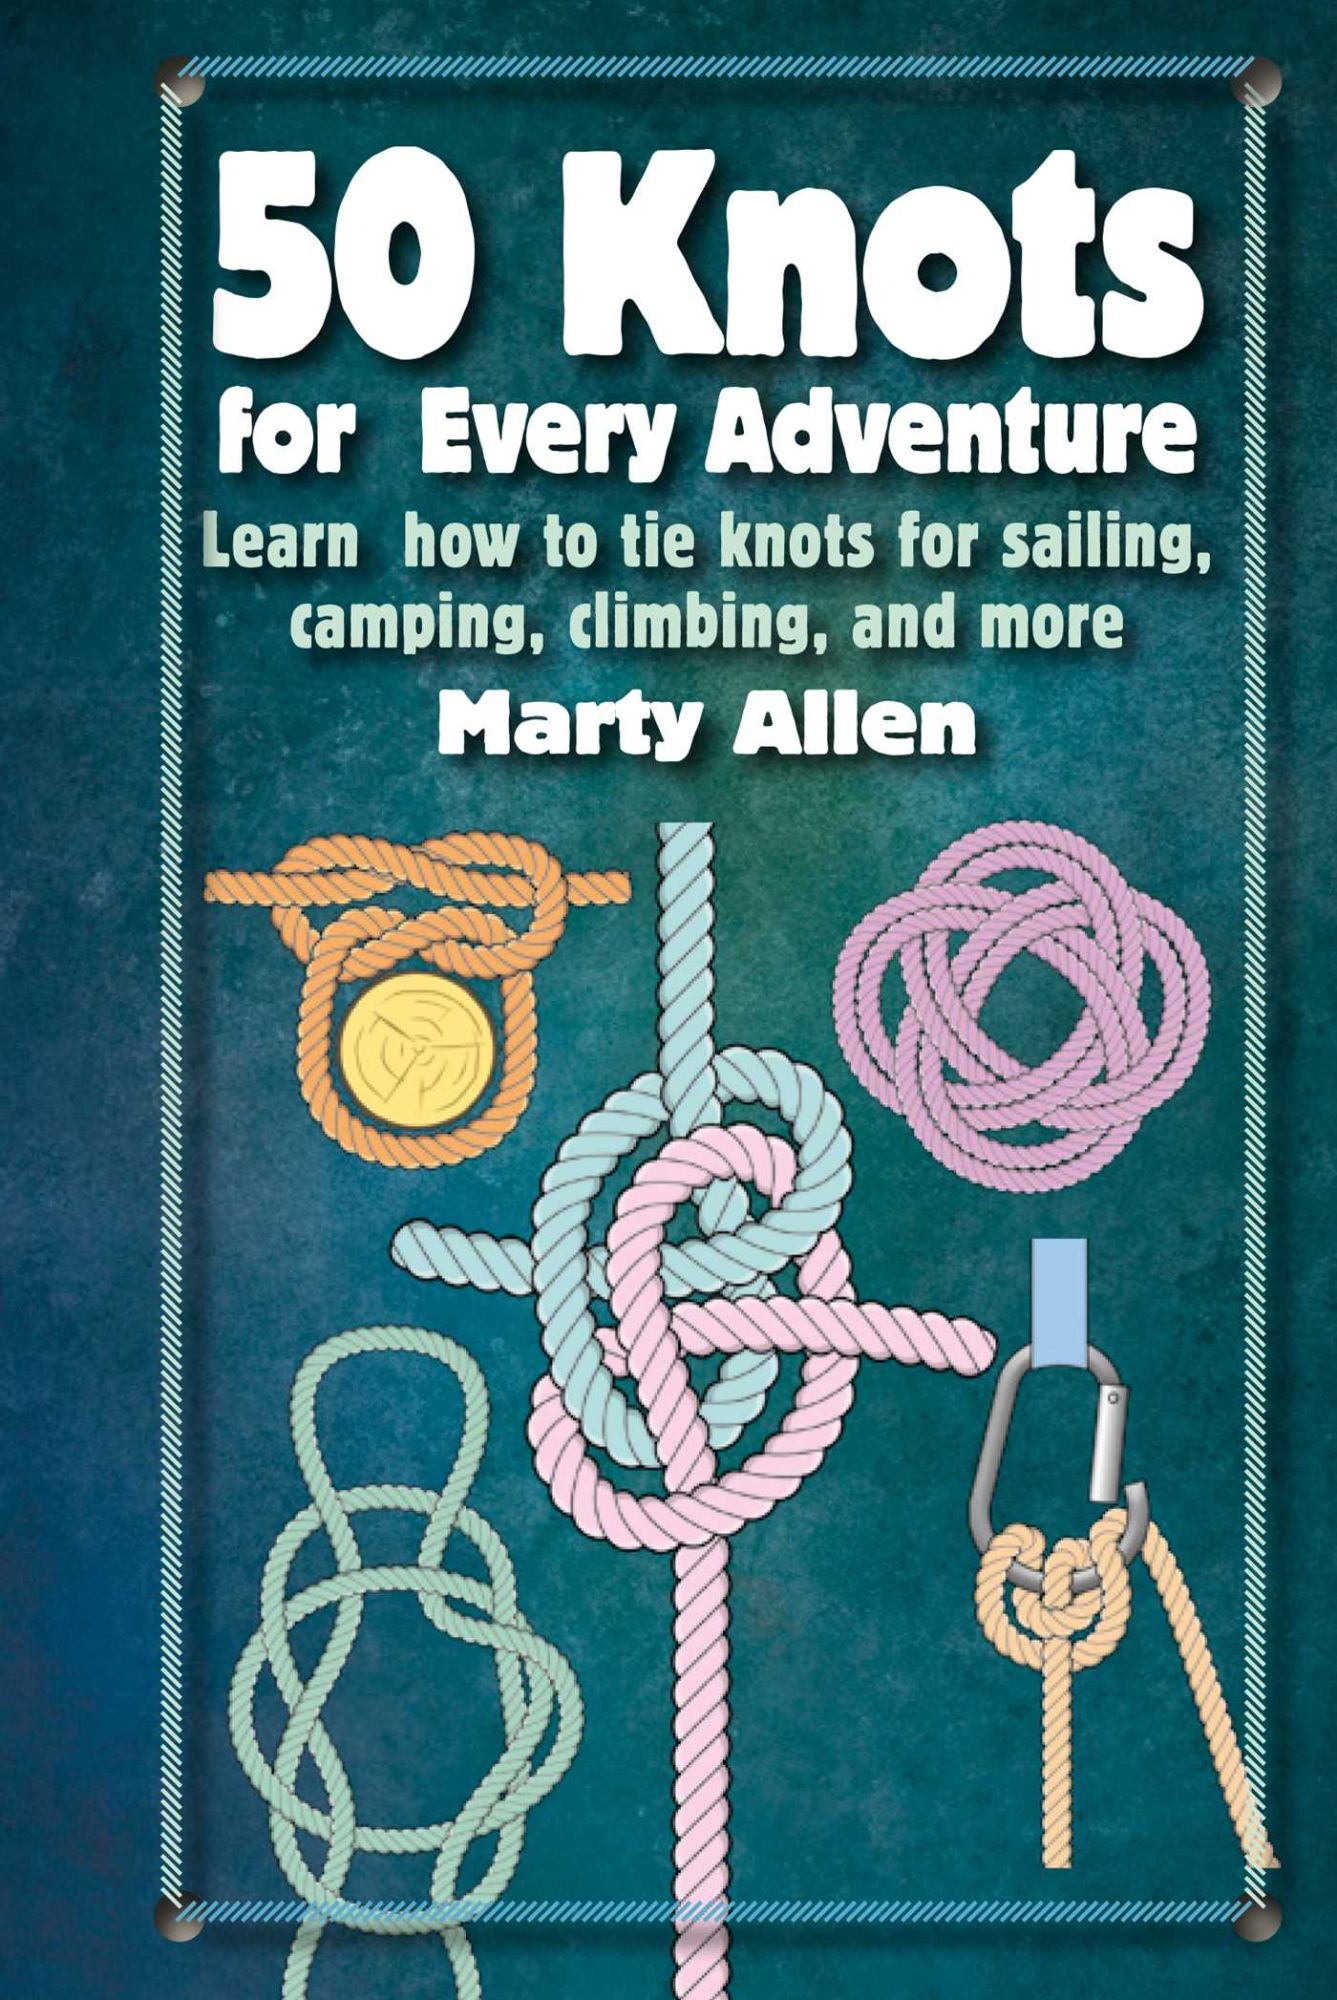 Speedy Knots: Quick and Easy Ways to Master the Basics (How to Tie Knots, Sailor Knots, Rock Climbing Knots, Rope Work, Activity Book for Kids) [Book]